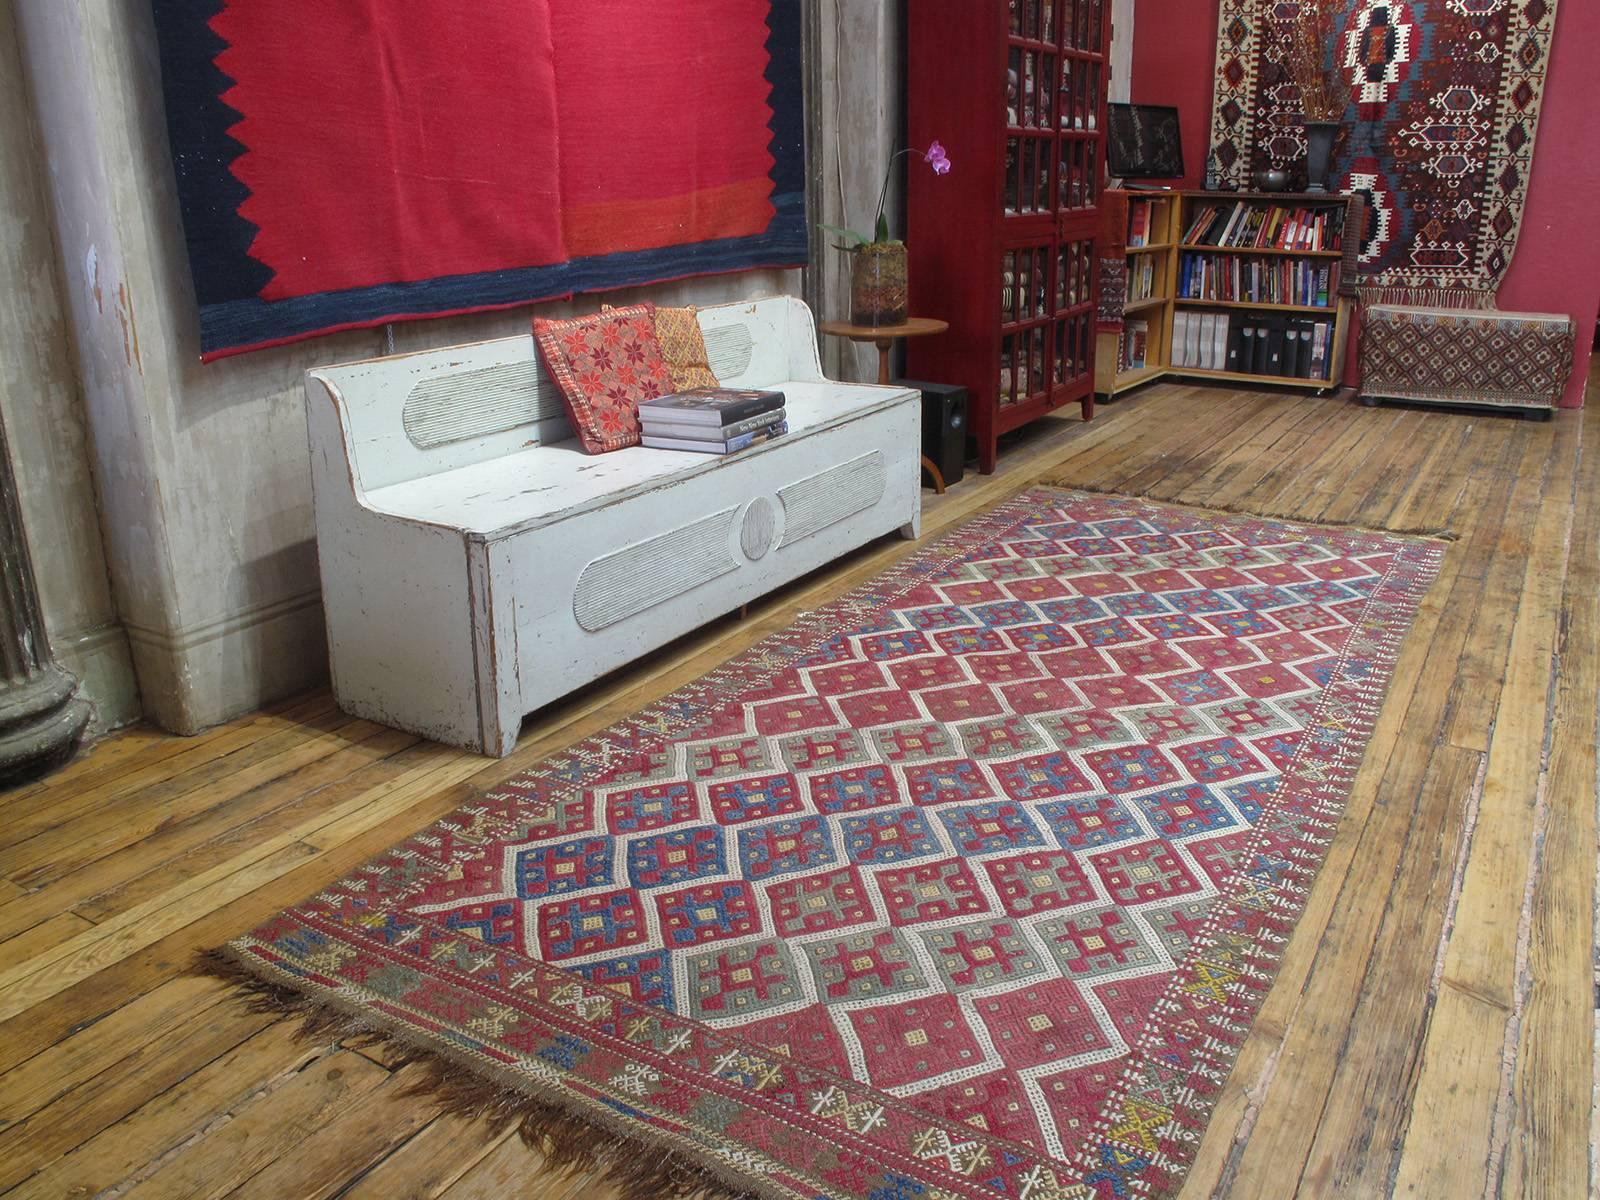 Antique Sivrihisar Jijim rug. An antique tribal flat-weave from West-Central Turkey, rug is woven in the intricate 